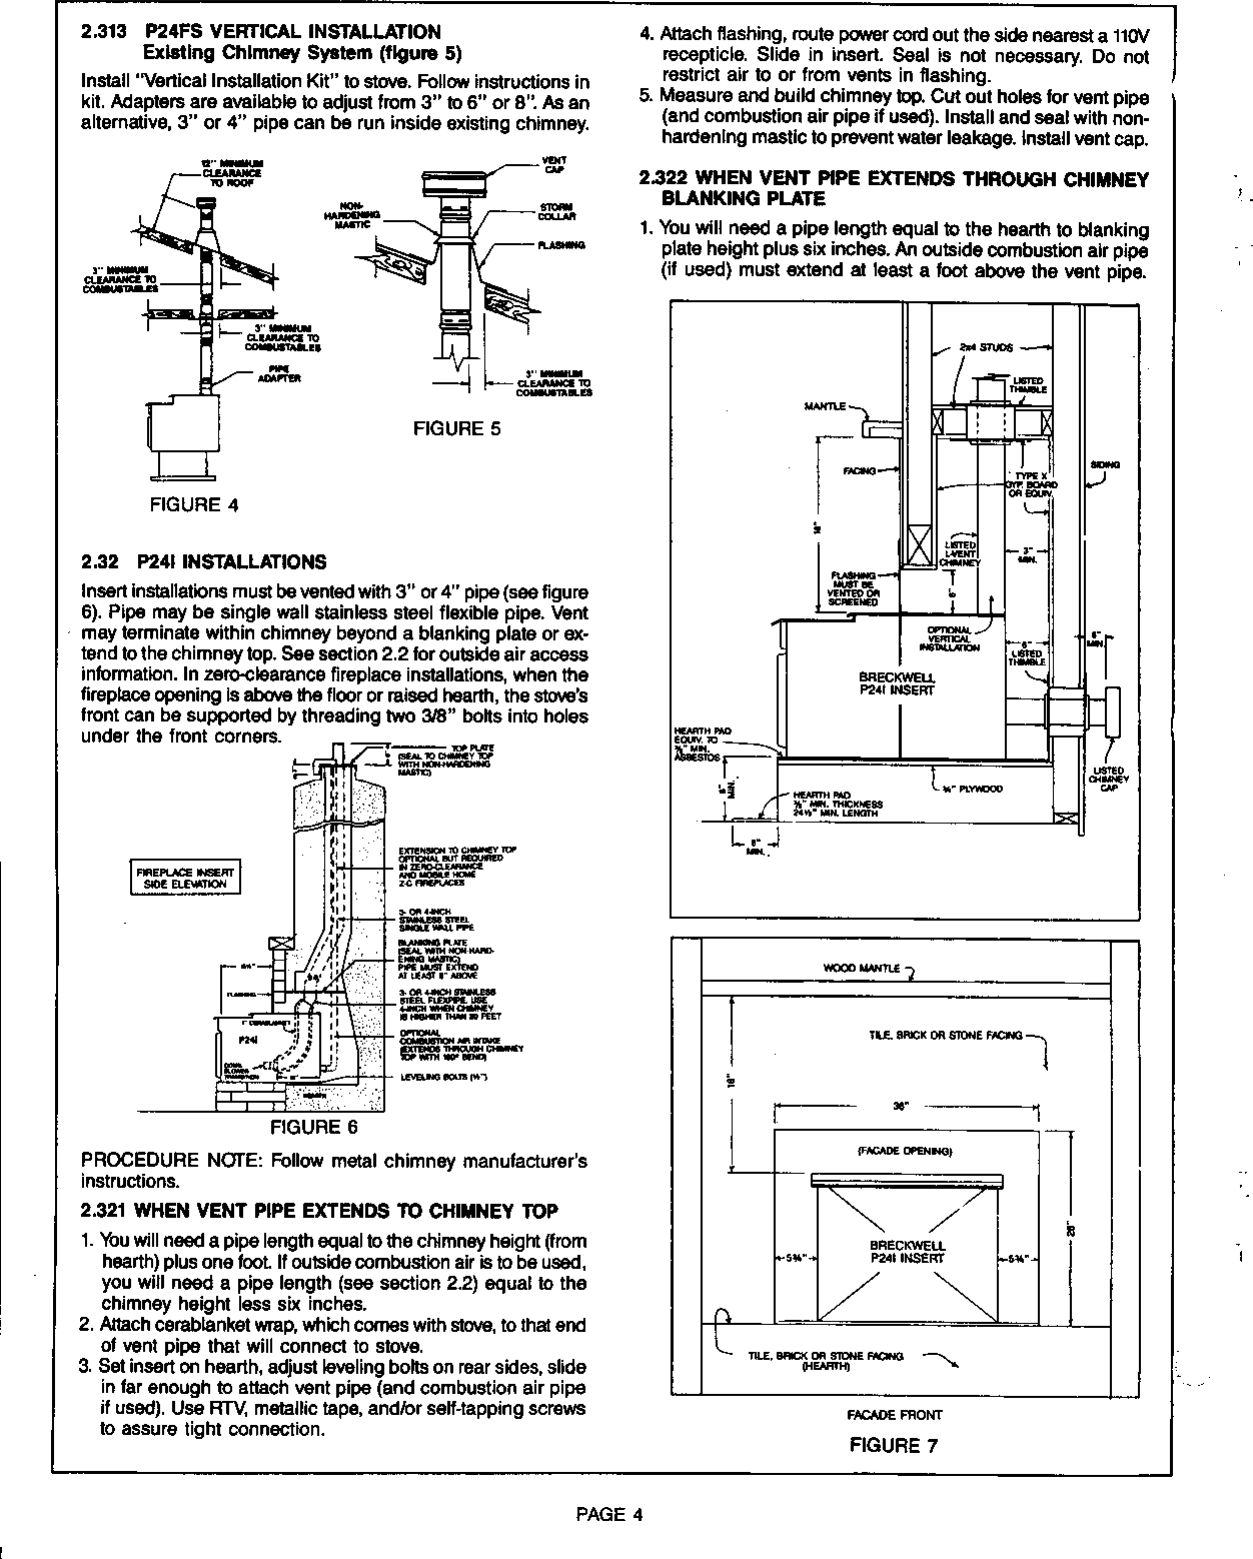 Page 4 of 9 - Breckwell Breckwell-1991-s-P24Fs-Users-Manual- P24 Blazer Pellet Stove Owner's Manual  Breckwell-1991-s-p24fs-users-manual